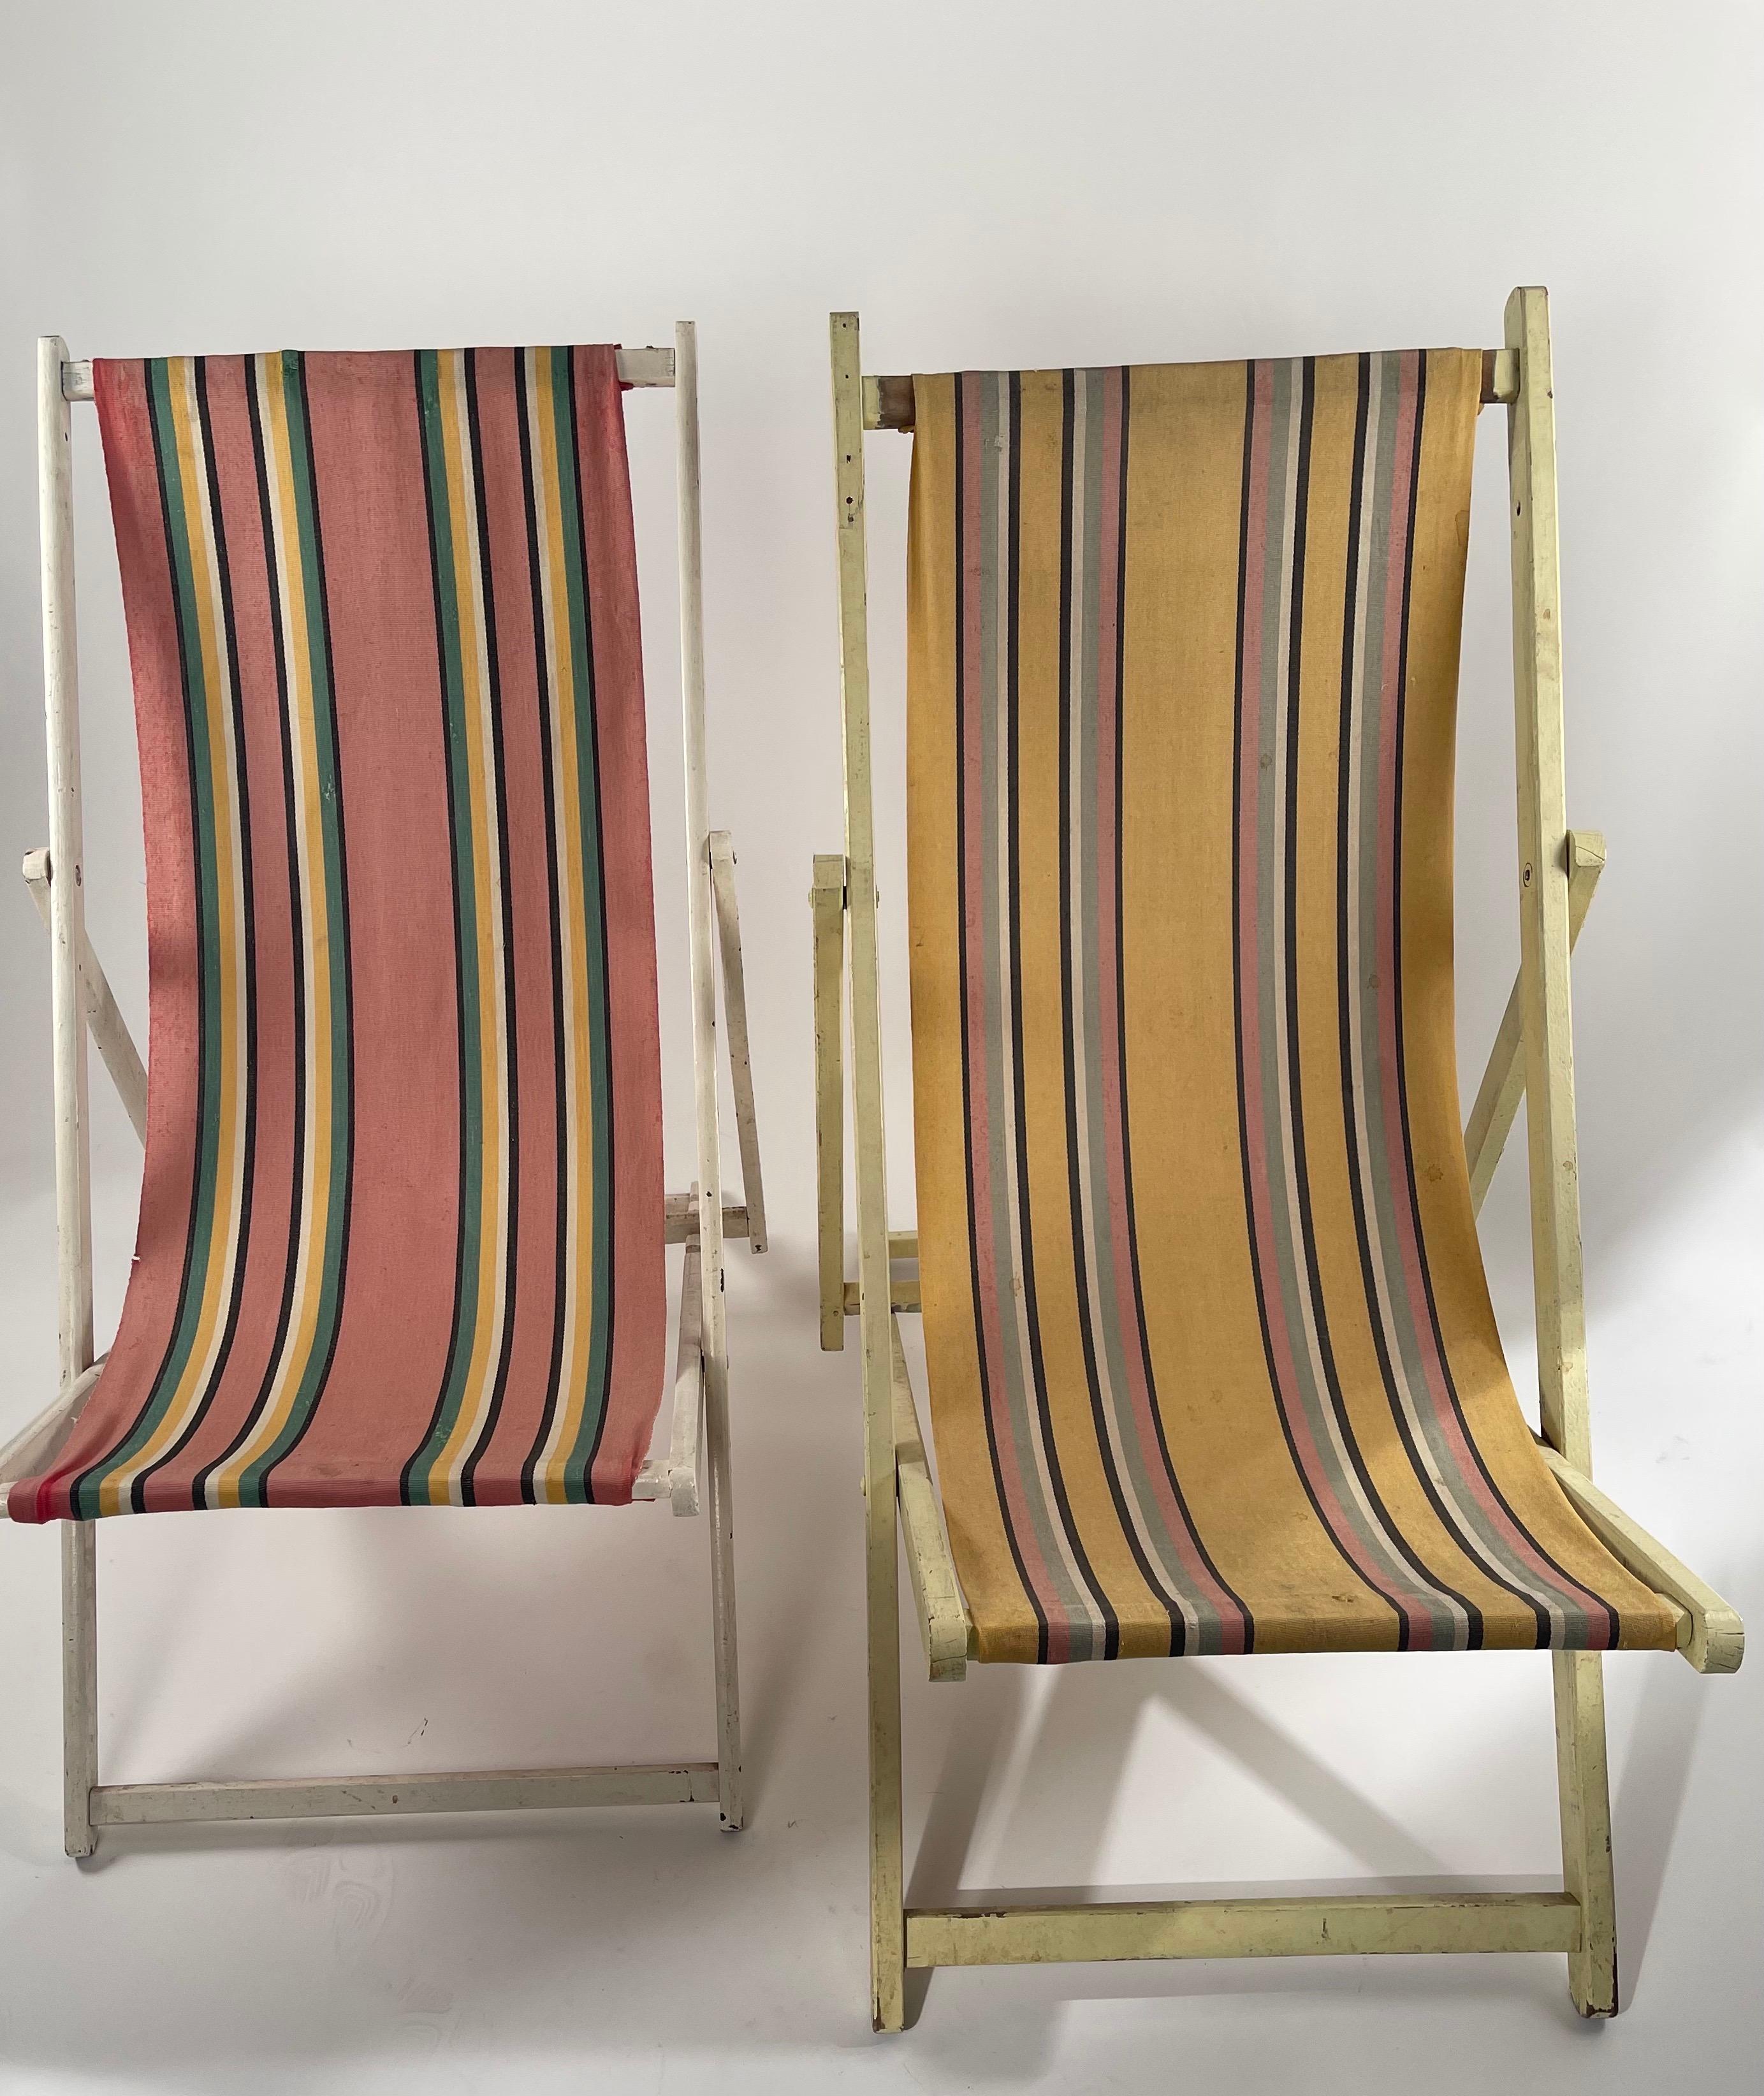 Classic striped canvas foldable chairs. Some staining but have a wonderfully vintage garden look and feel.